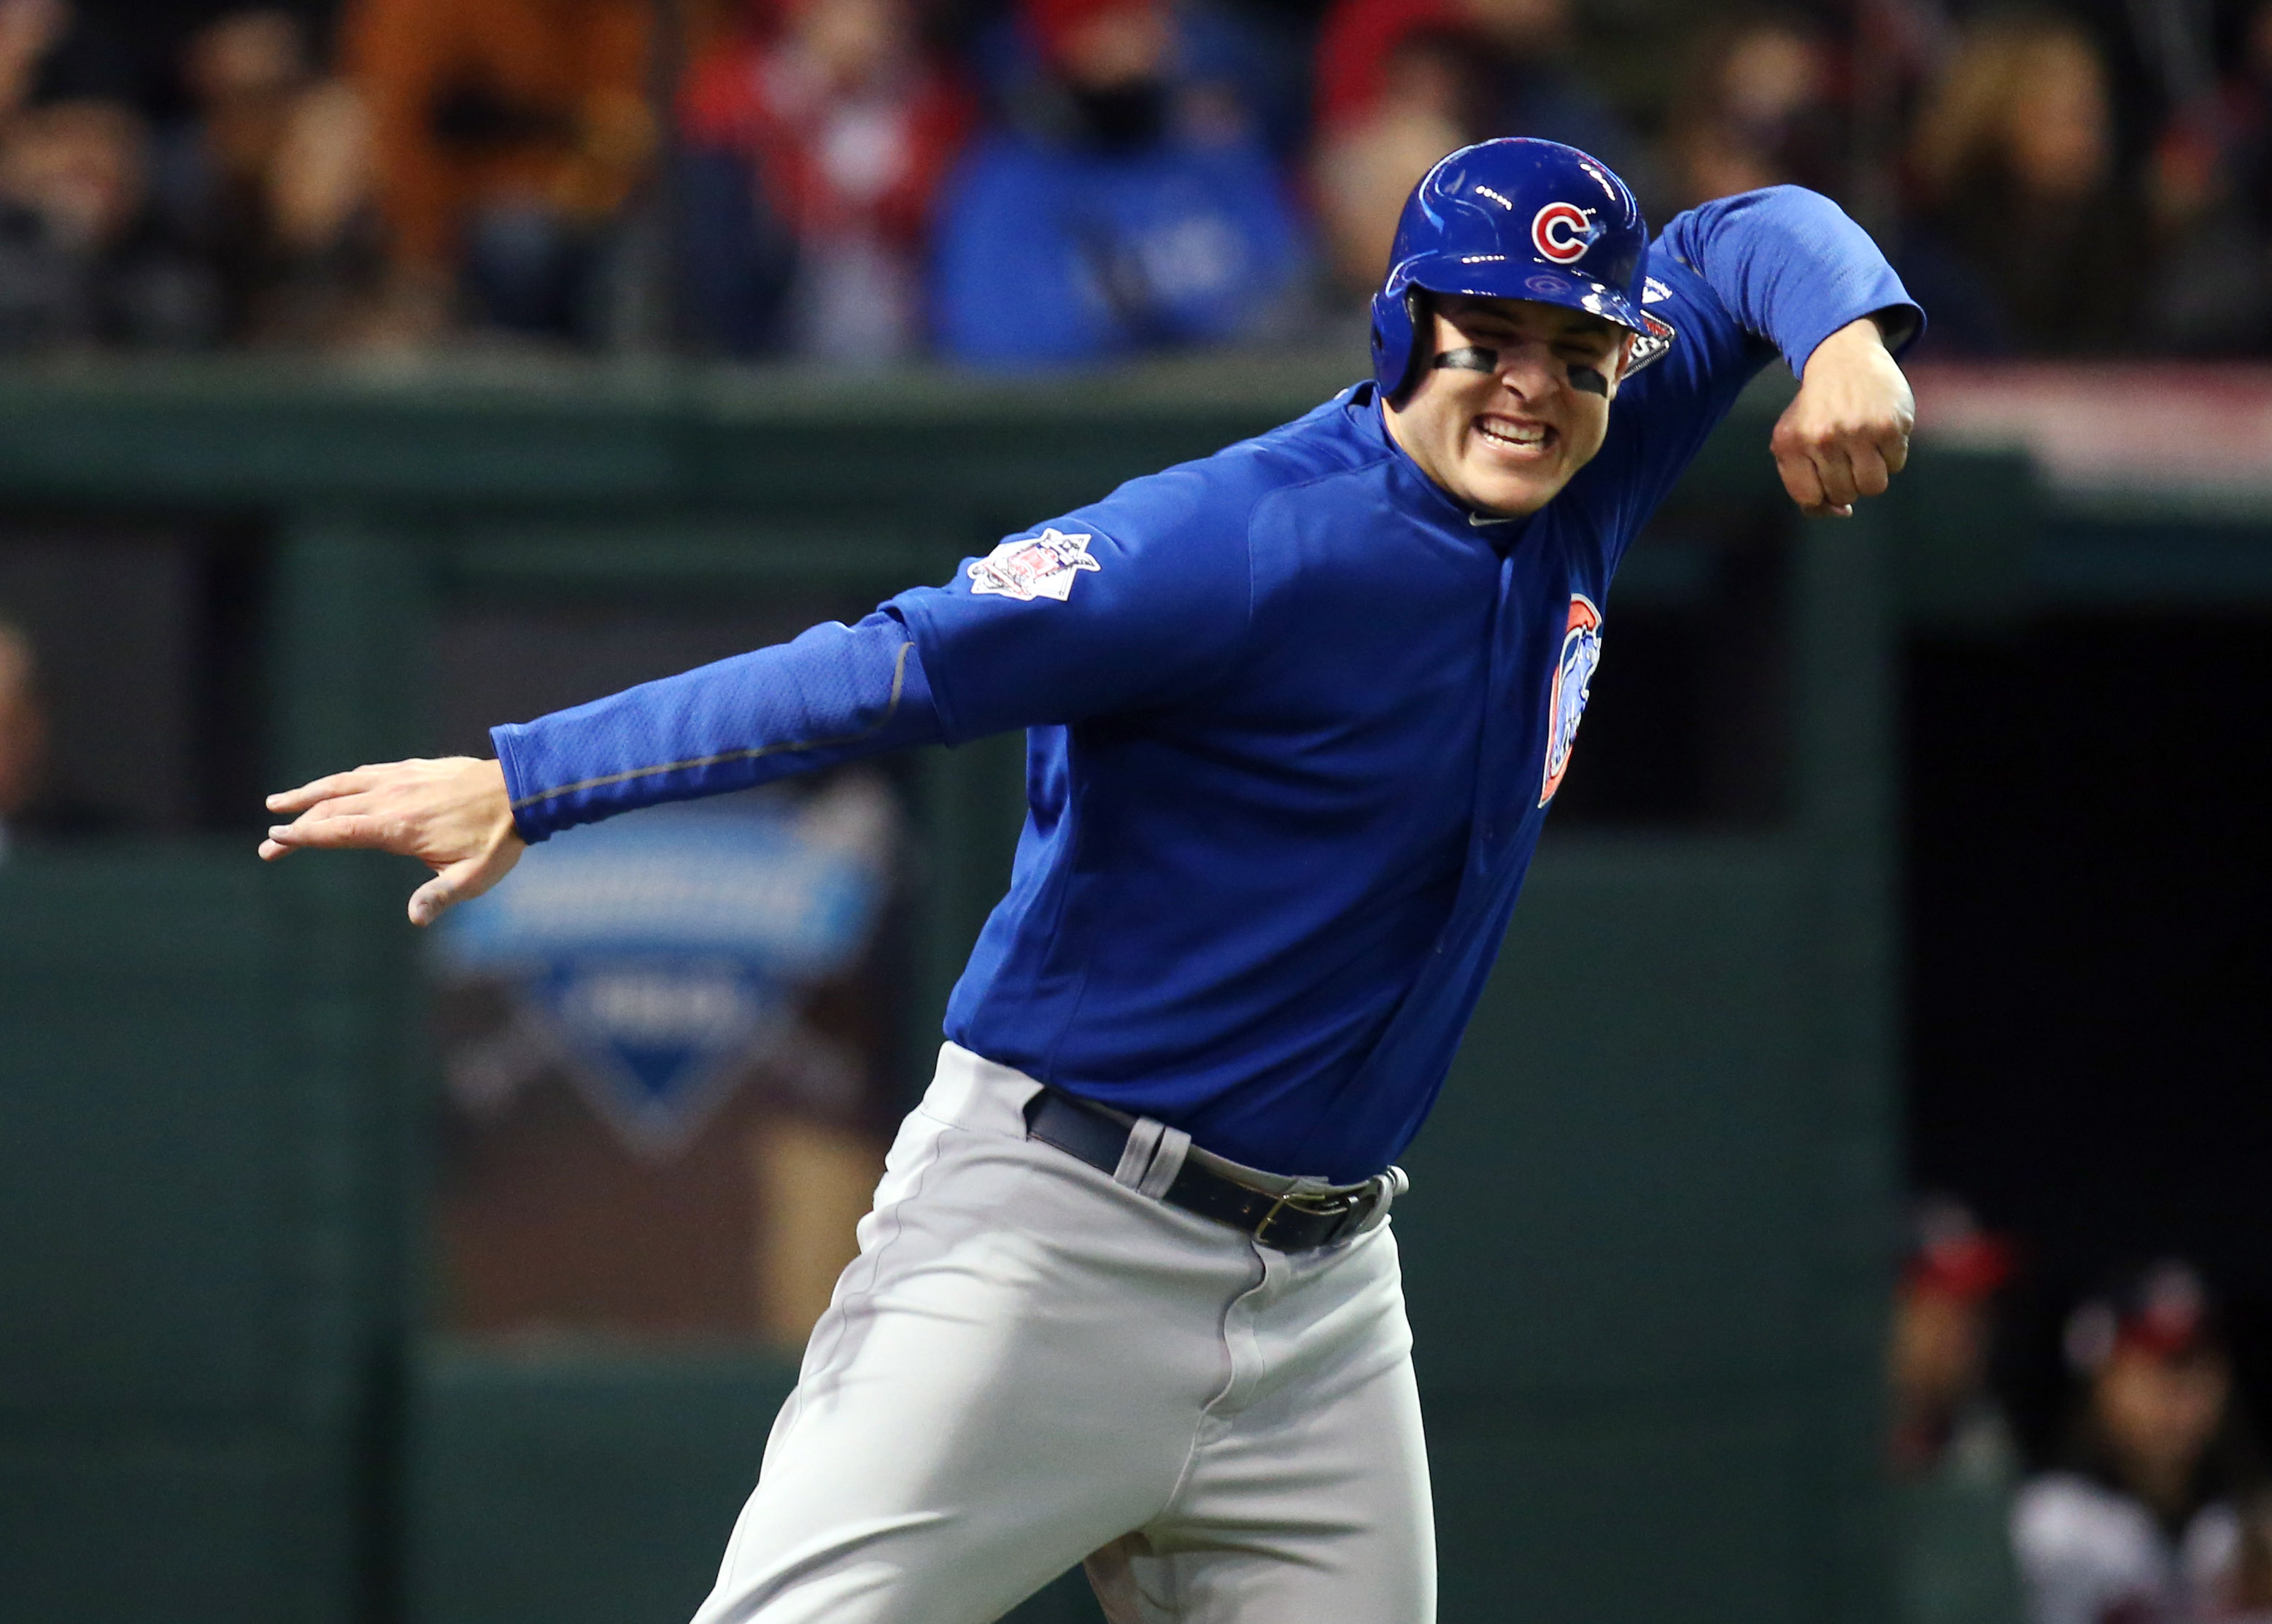 Cubs start fast, beat Indians in Game 2 to even up World Series